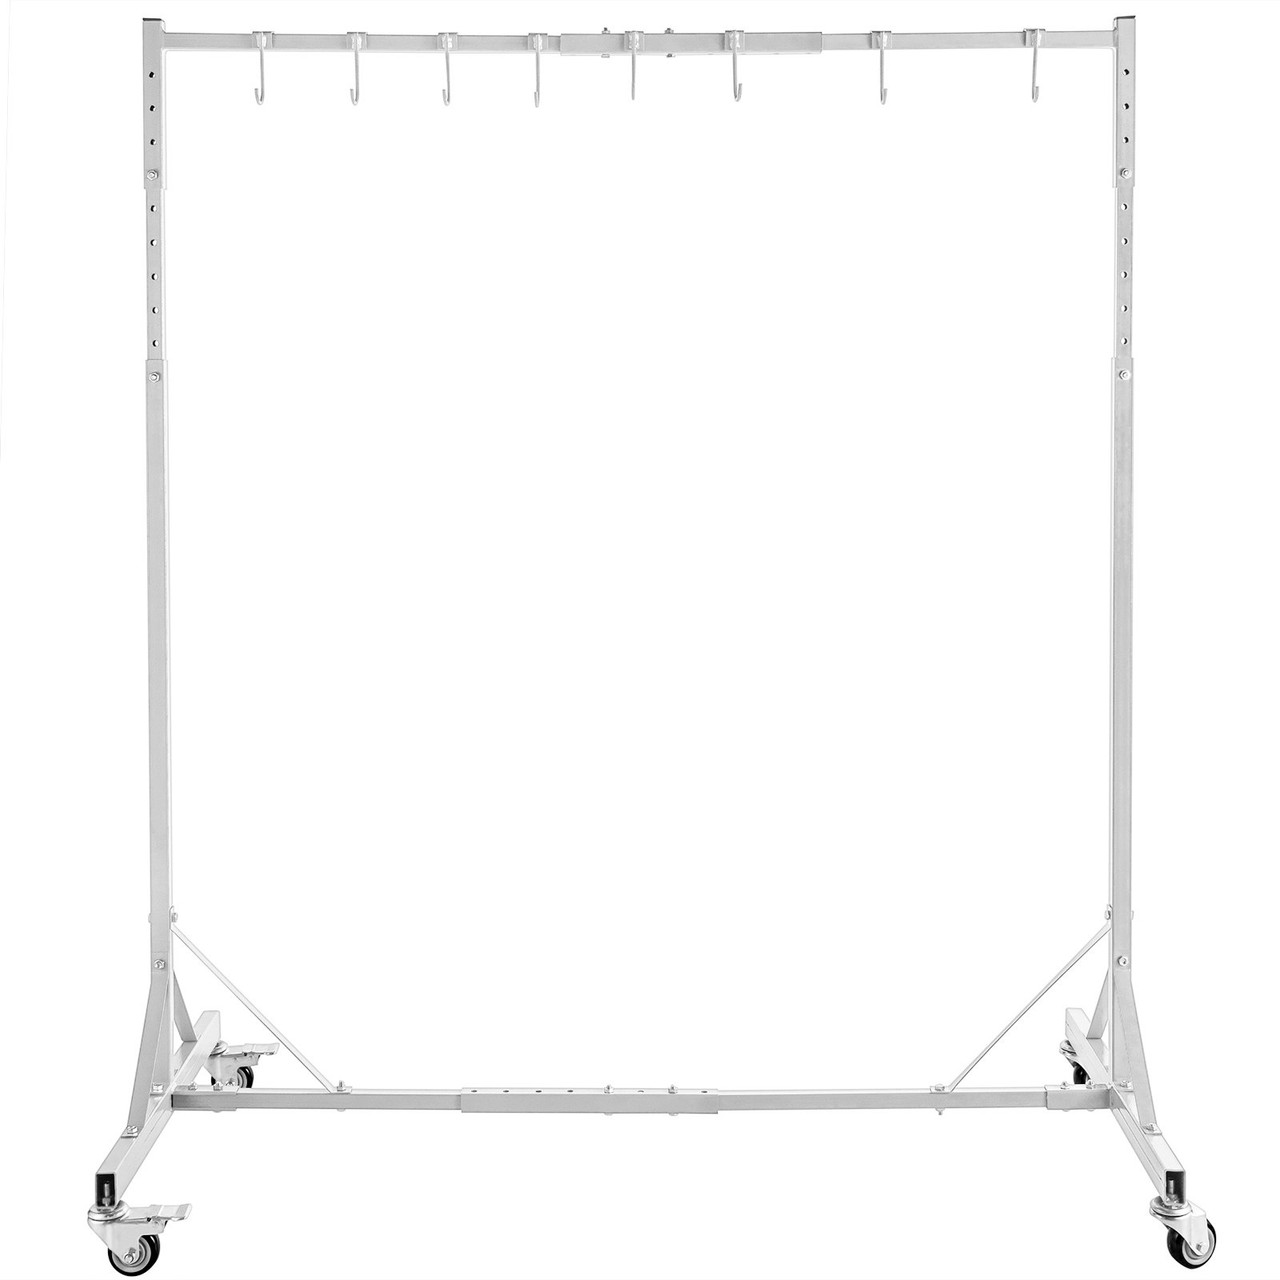 VEVOR Painting Rack 5ft-7ft Adjustable Height, Automotive Paint Stand 8 Hooks, Auto Body Stand for Hoods Doors, Painting Drying Rack w/ 4 Swiveling Wheels, Paint Rack Stand, Automotive Tools, White